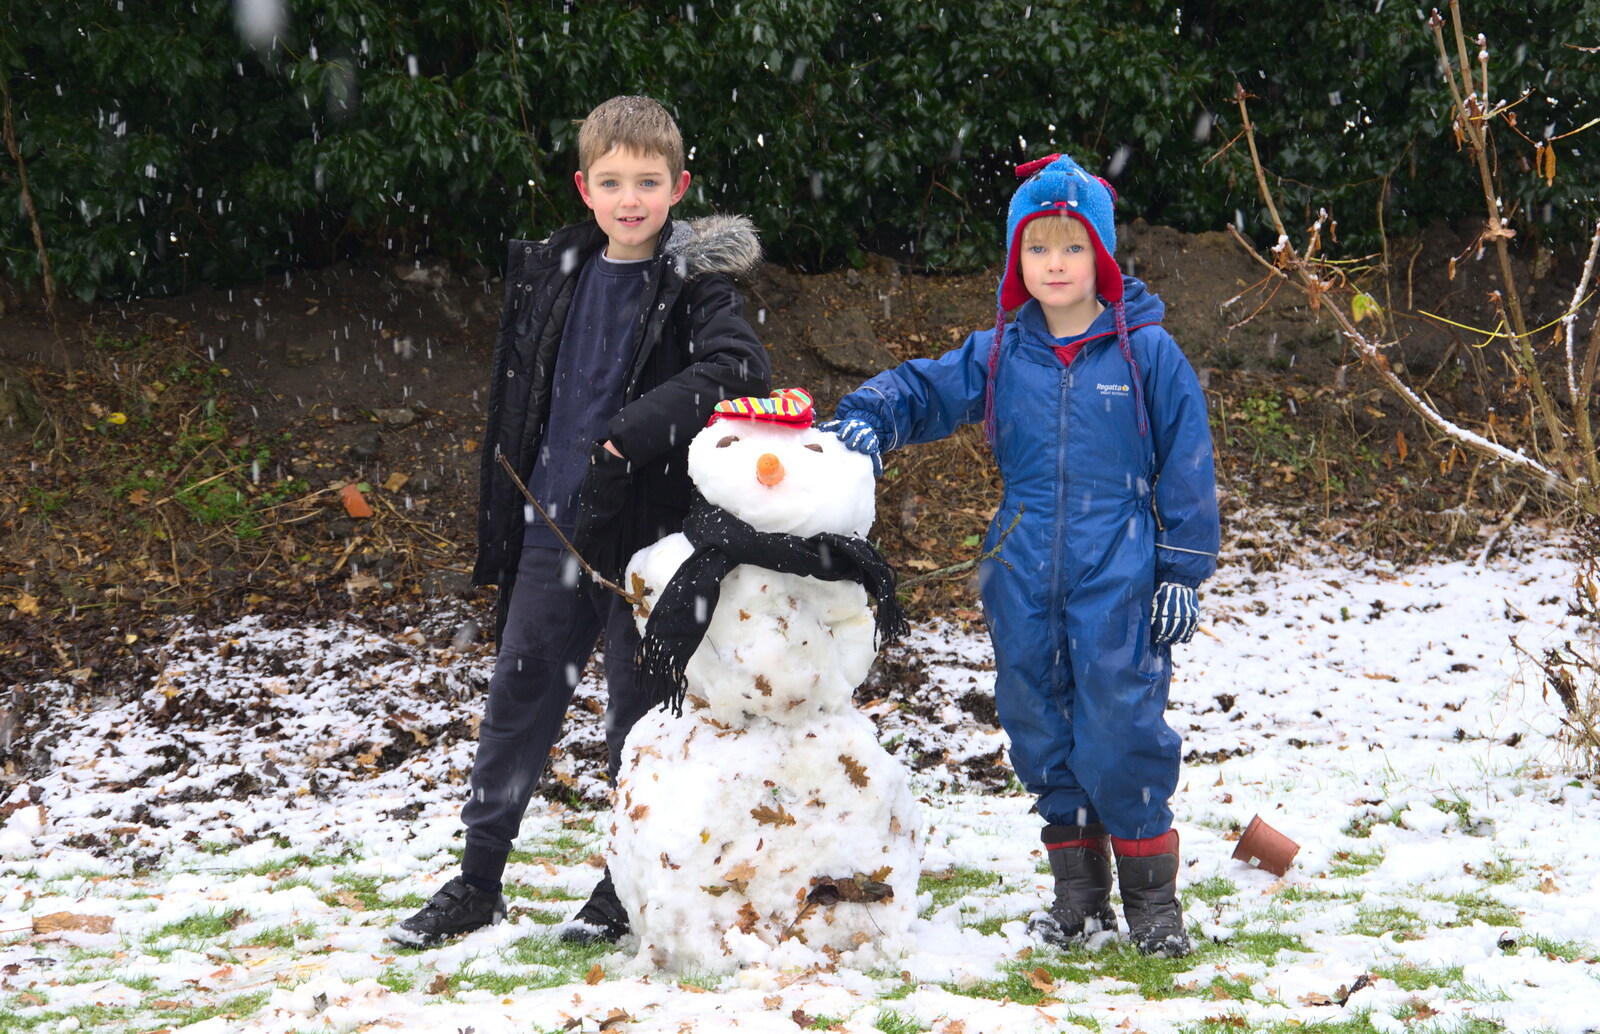 Fred and Harry with their snowman from An Early Snow Day and the Christmas Tree, Brome, Suffolk - 10th December 2017